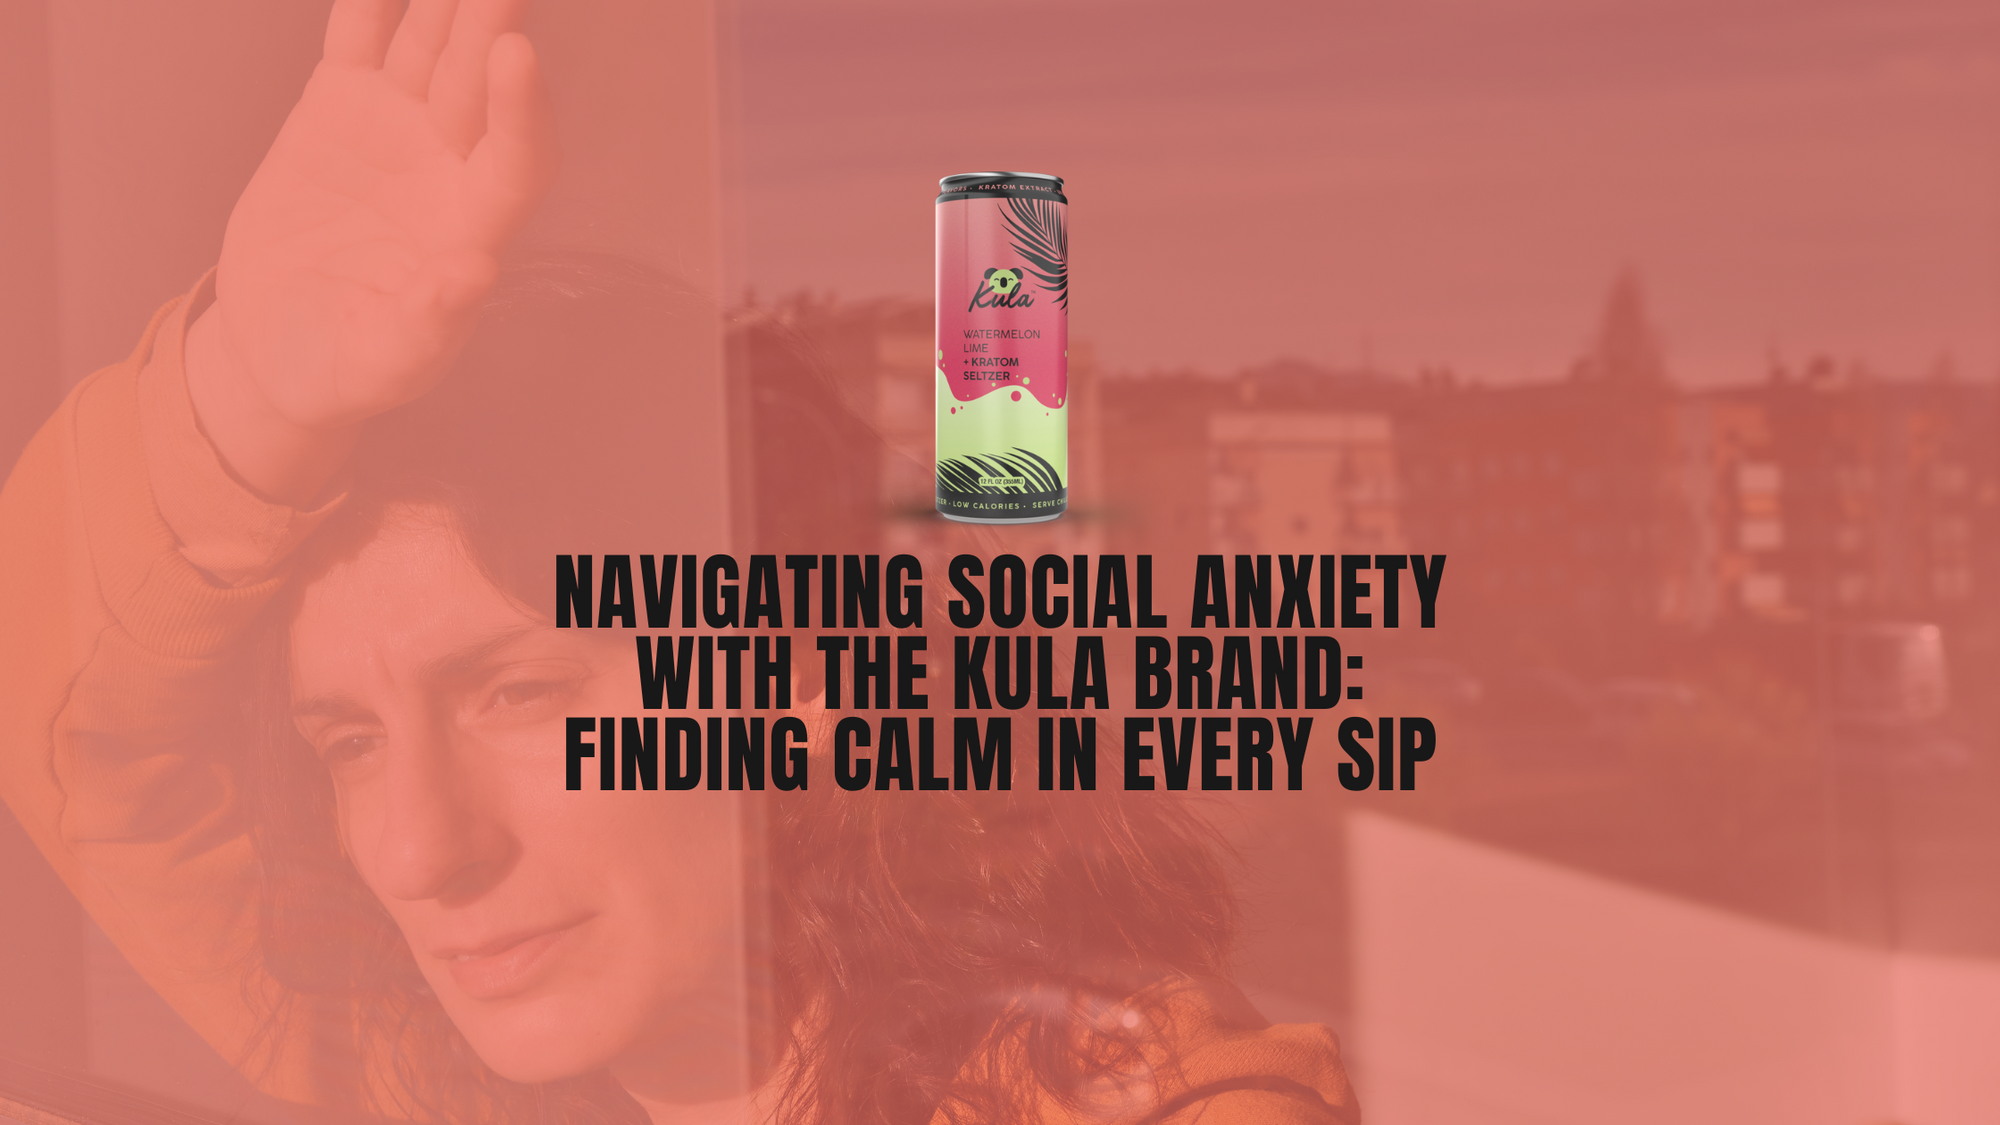 Navigating Social Anxiety with The Kula Brand: Finding Calm in Every Sip